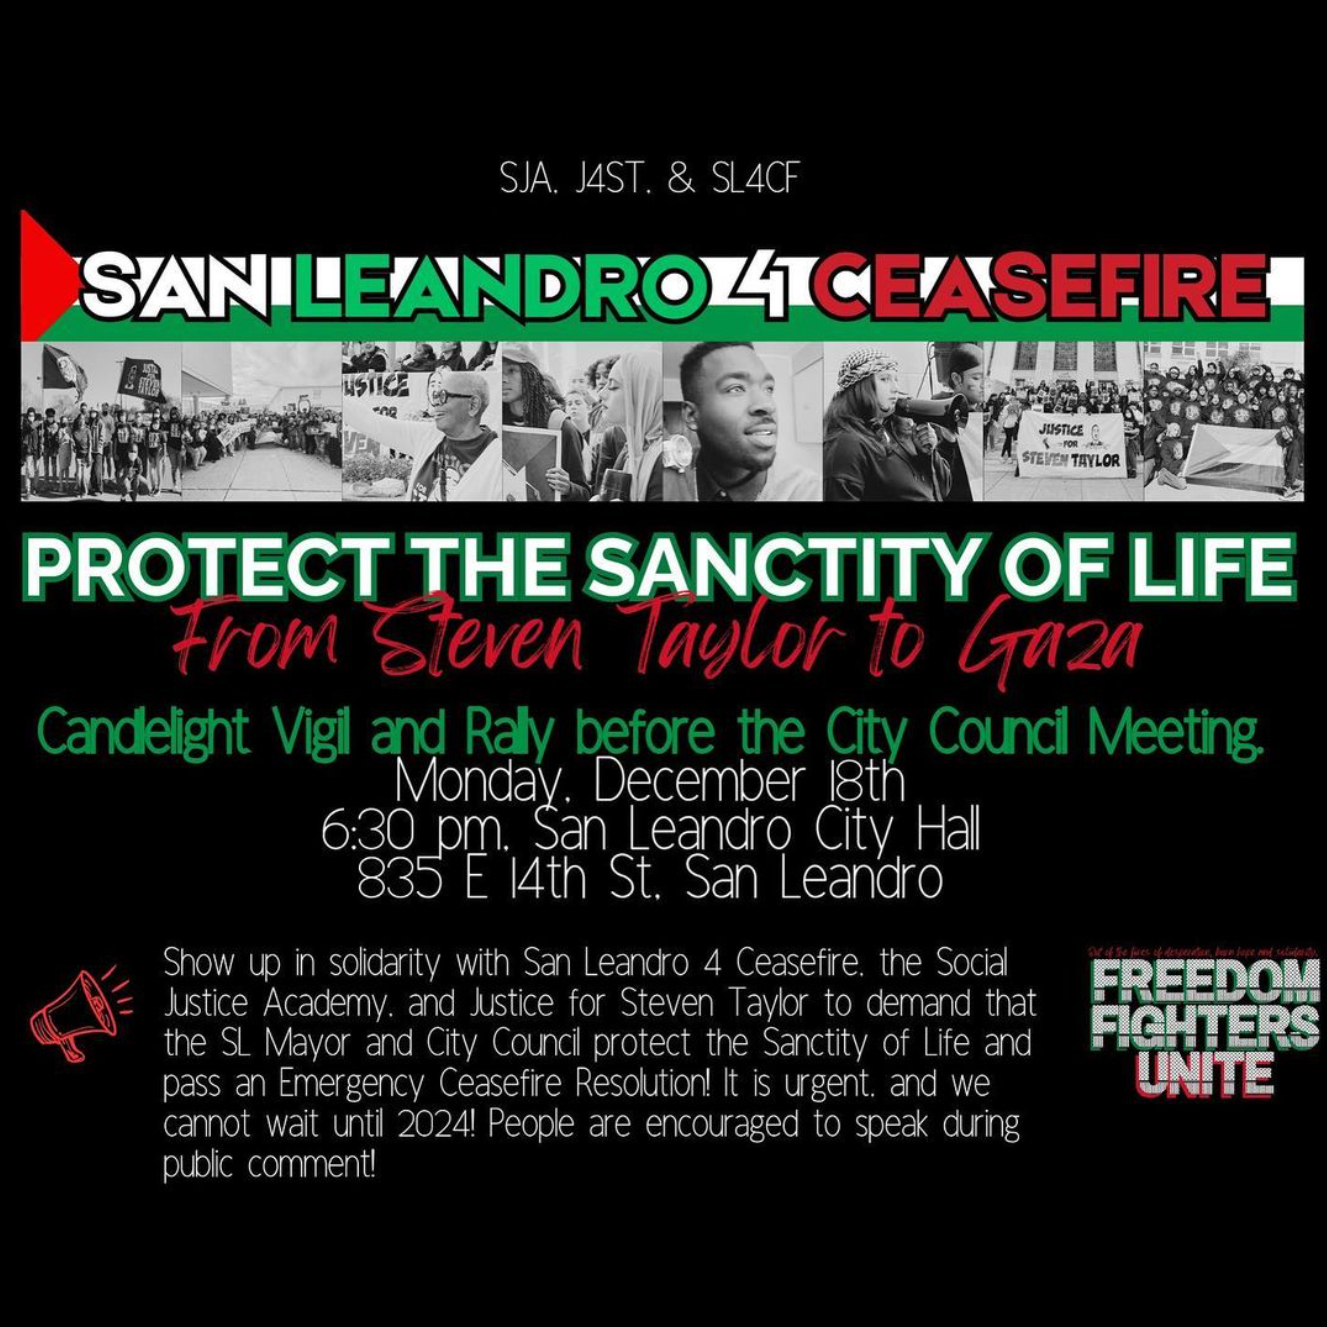 Action: San Leandro For Ceasefire, Protect The Sanctity Of Life